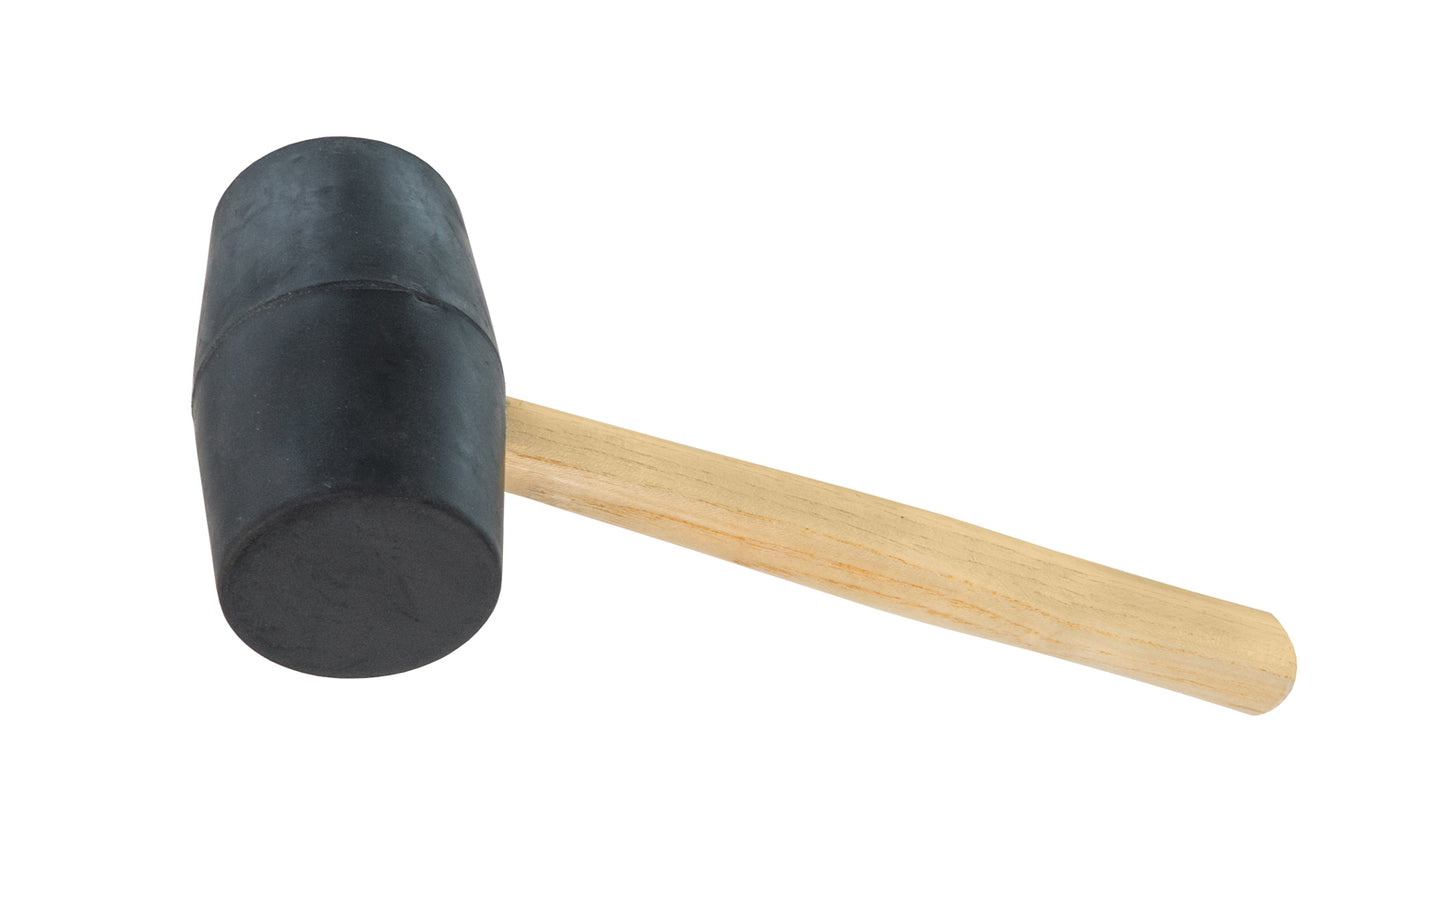 This 32 oz Black Rubber Mallet Rubber will not mar or scratch surfaces. Wisdom Tools. 761605102390. 32 oz rubber mallet with wood handle.